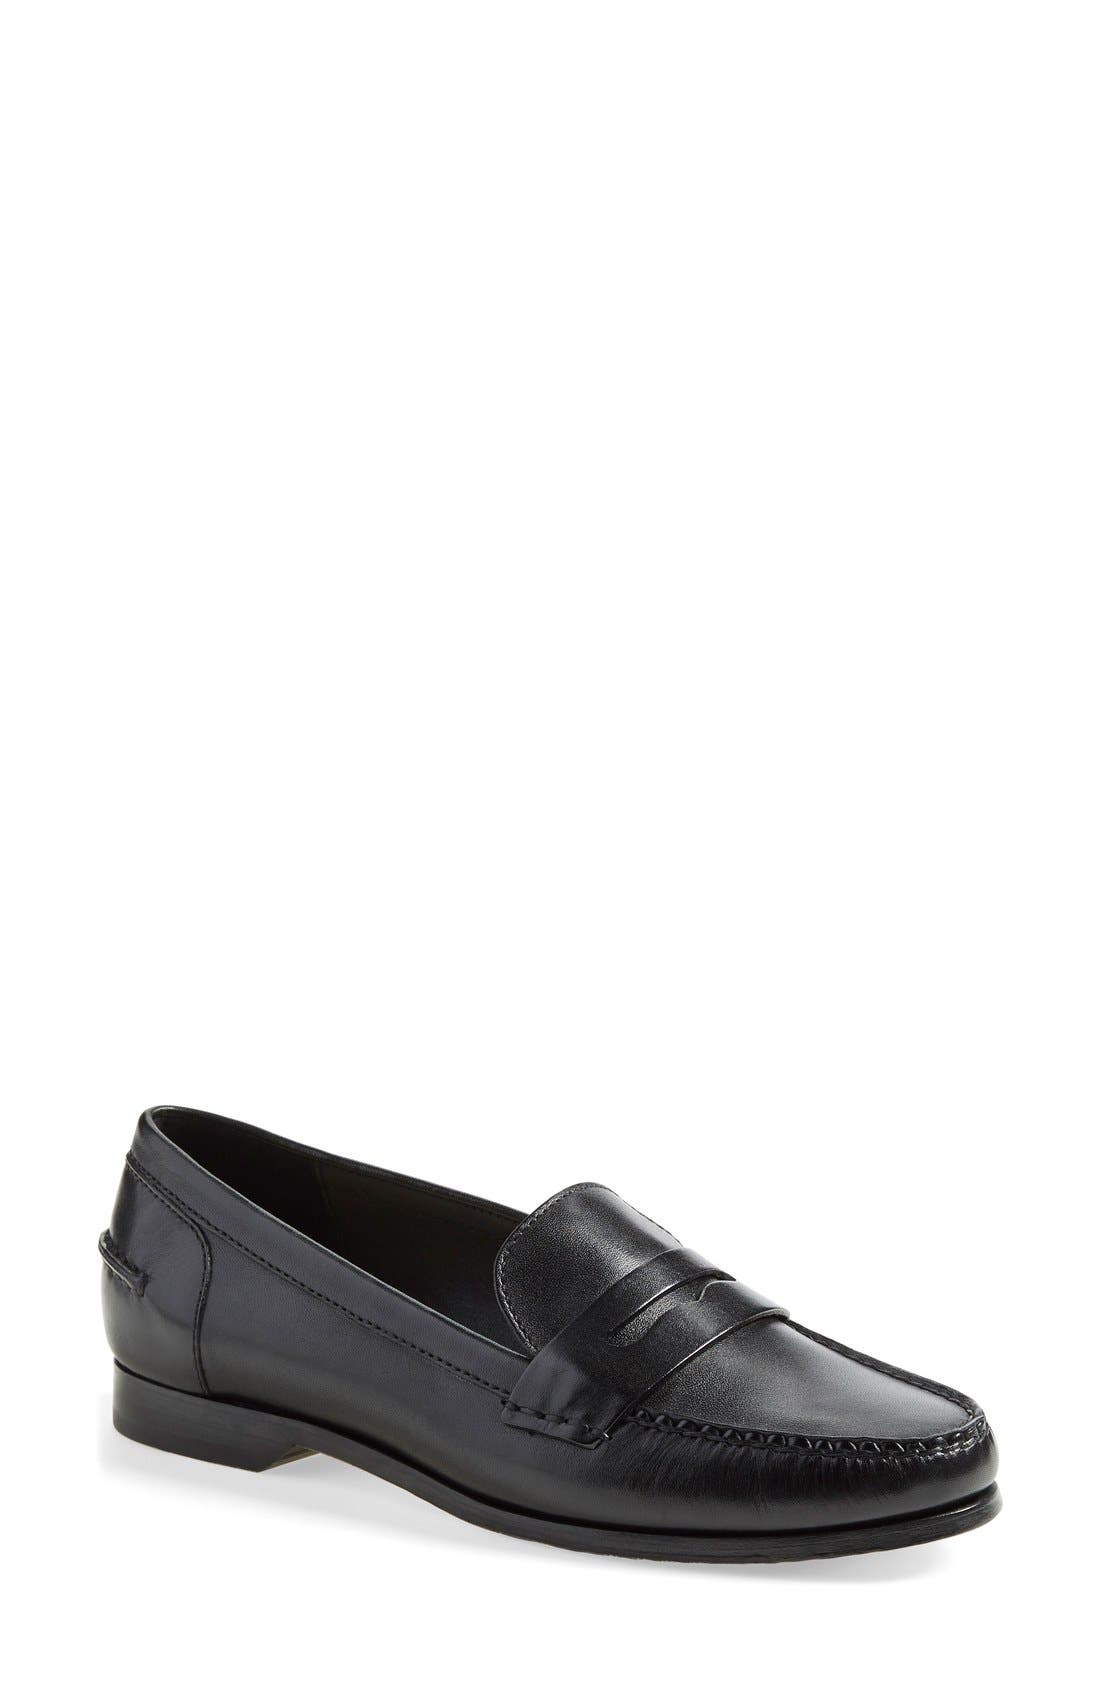 Cole Haan 'Pinch Grand' Penny Loafer 